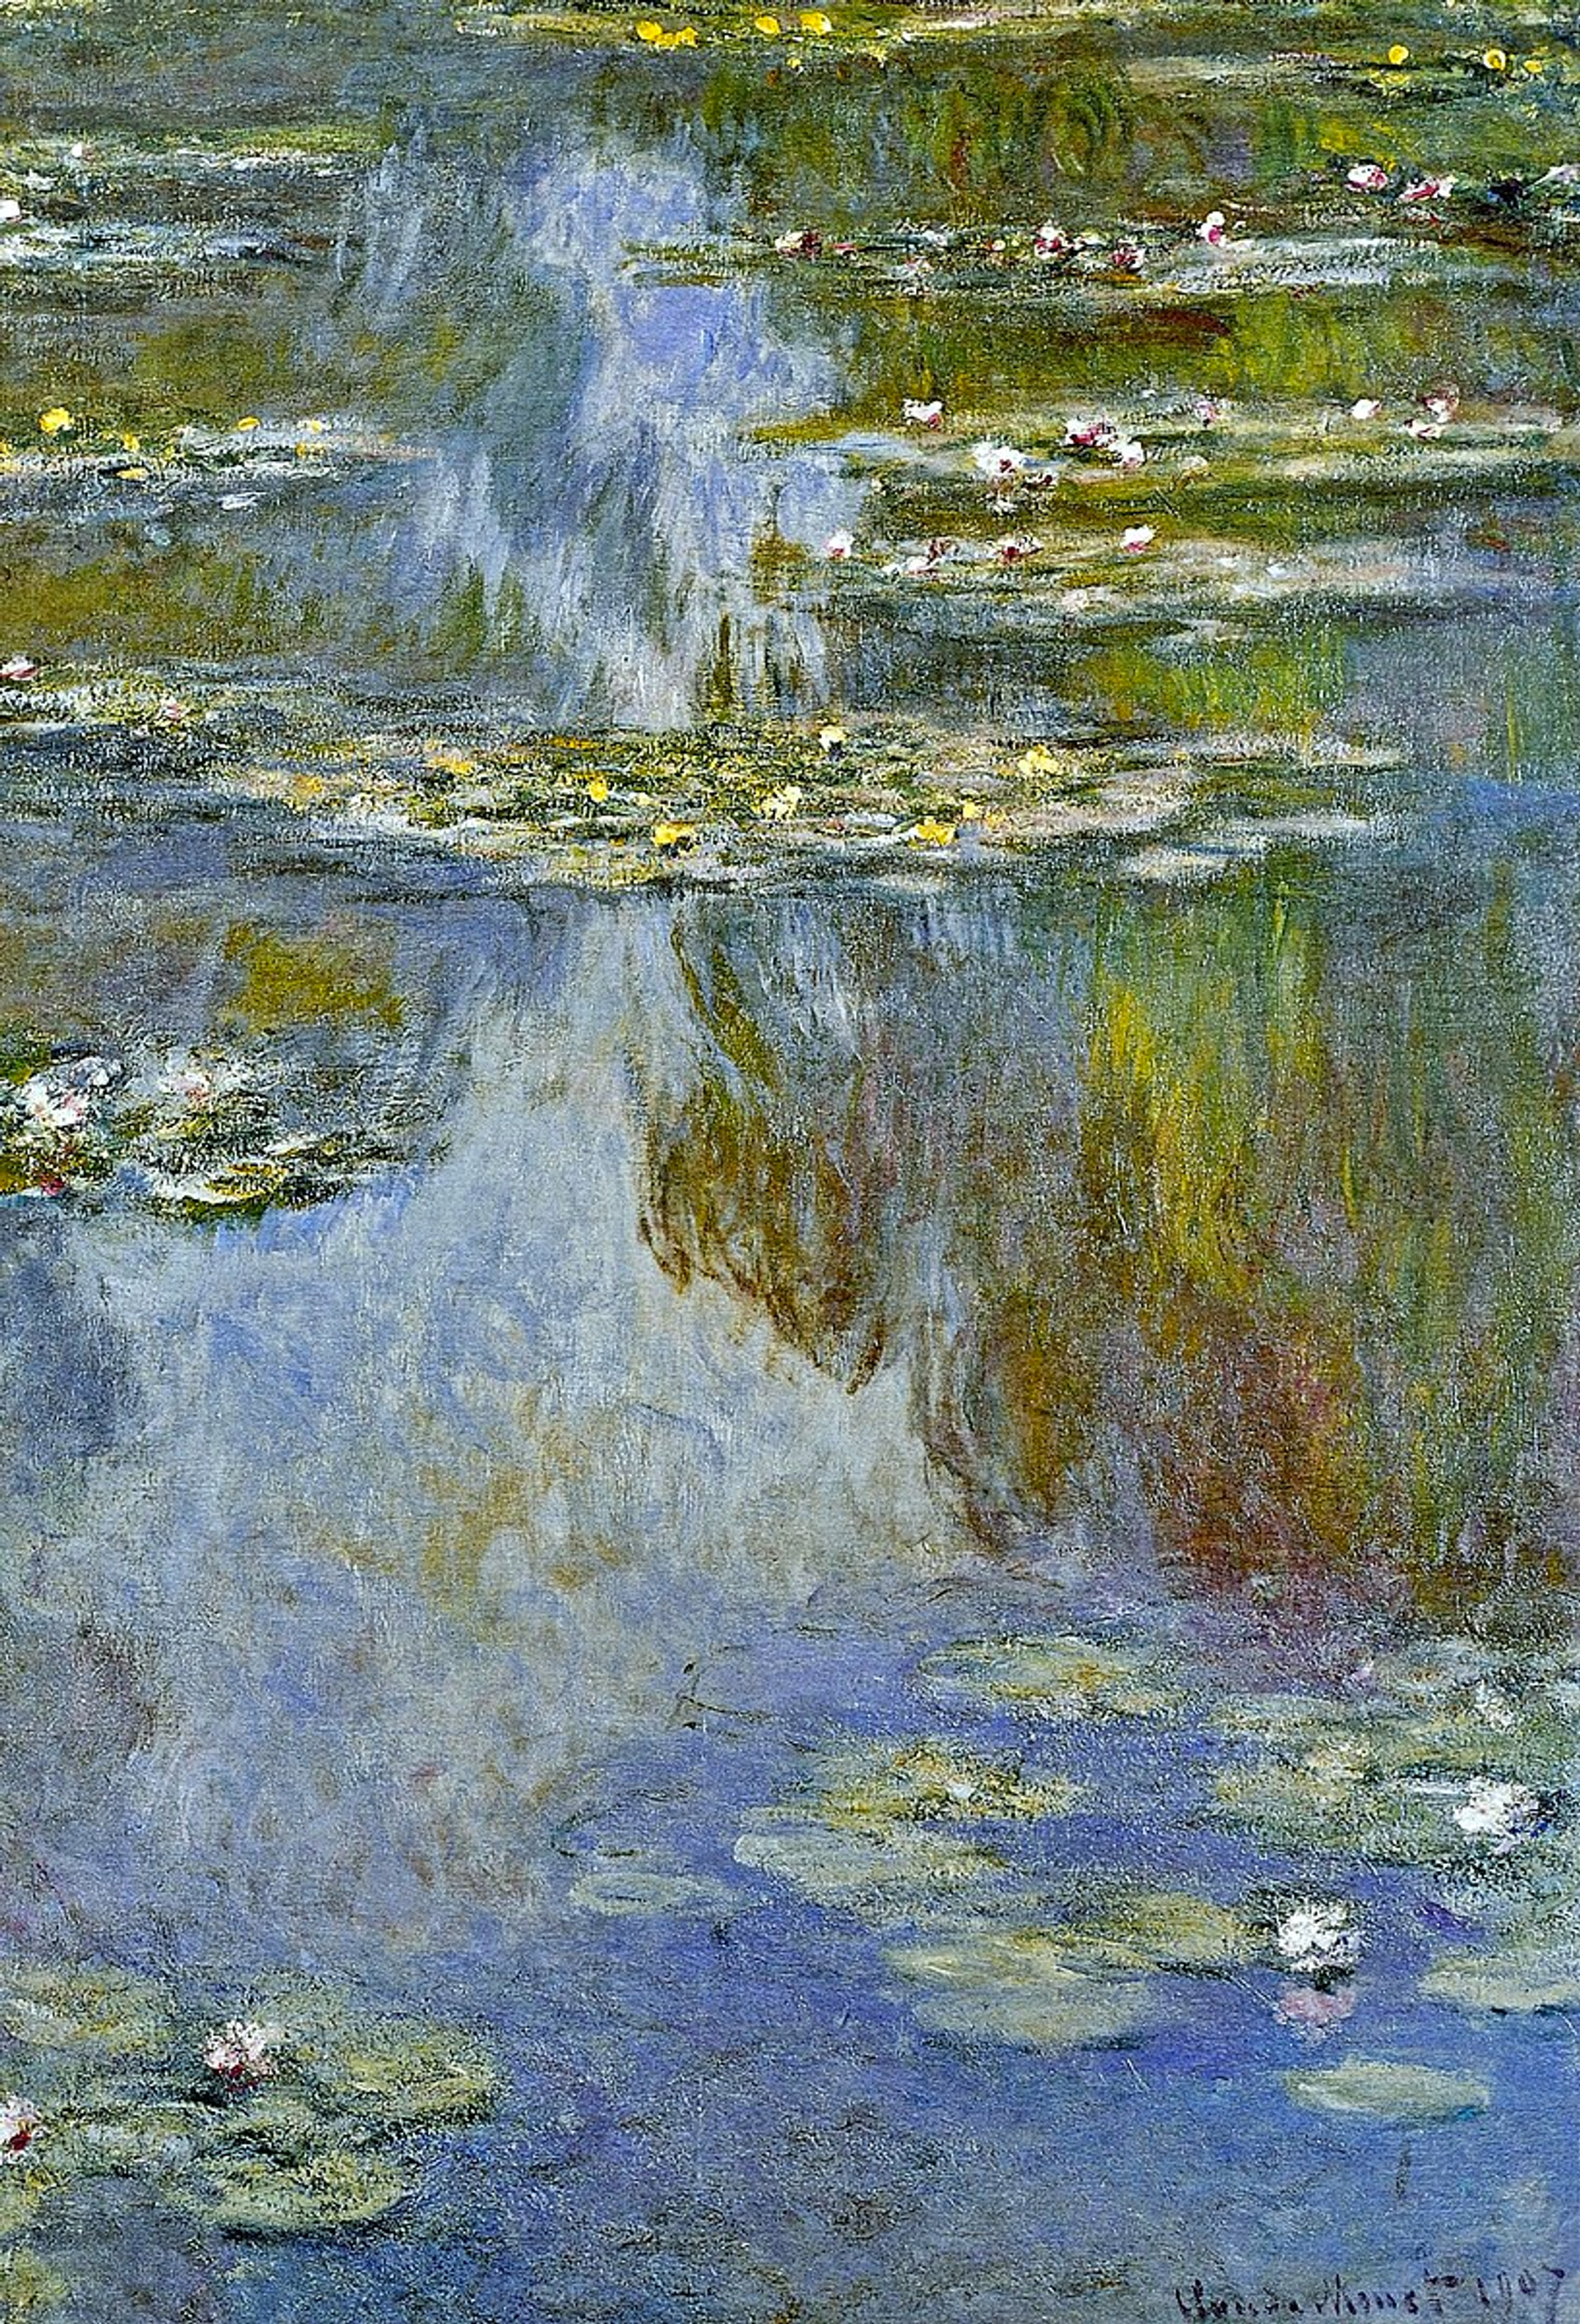 An image of one of Monet's famous Water Lilies, showing the sky reflected on a pond filled with water lilies.